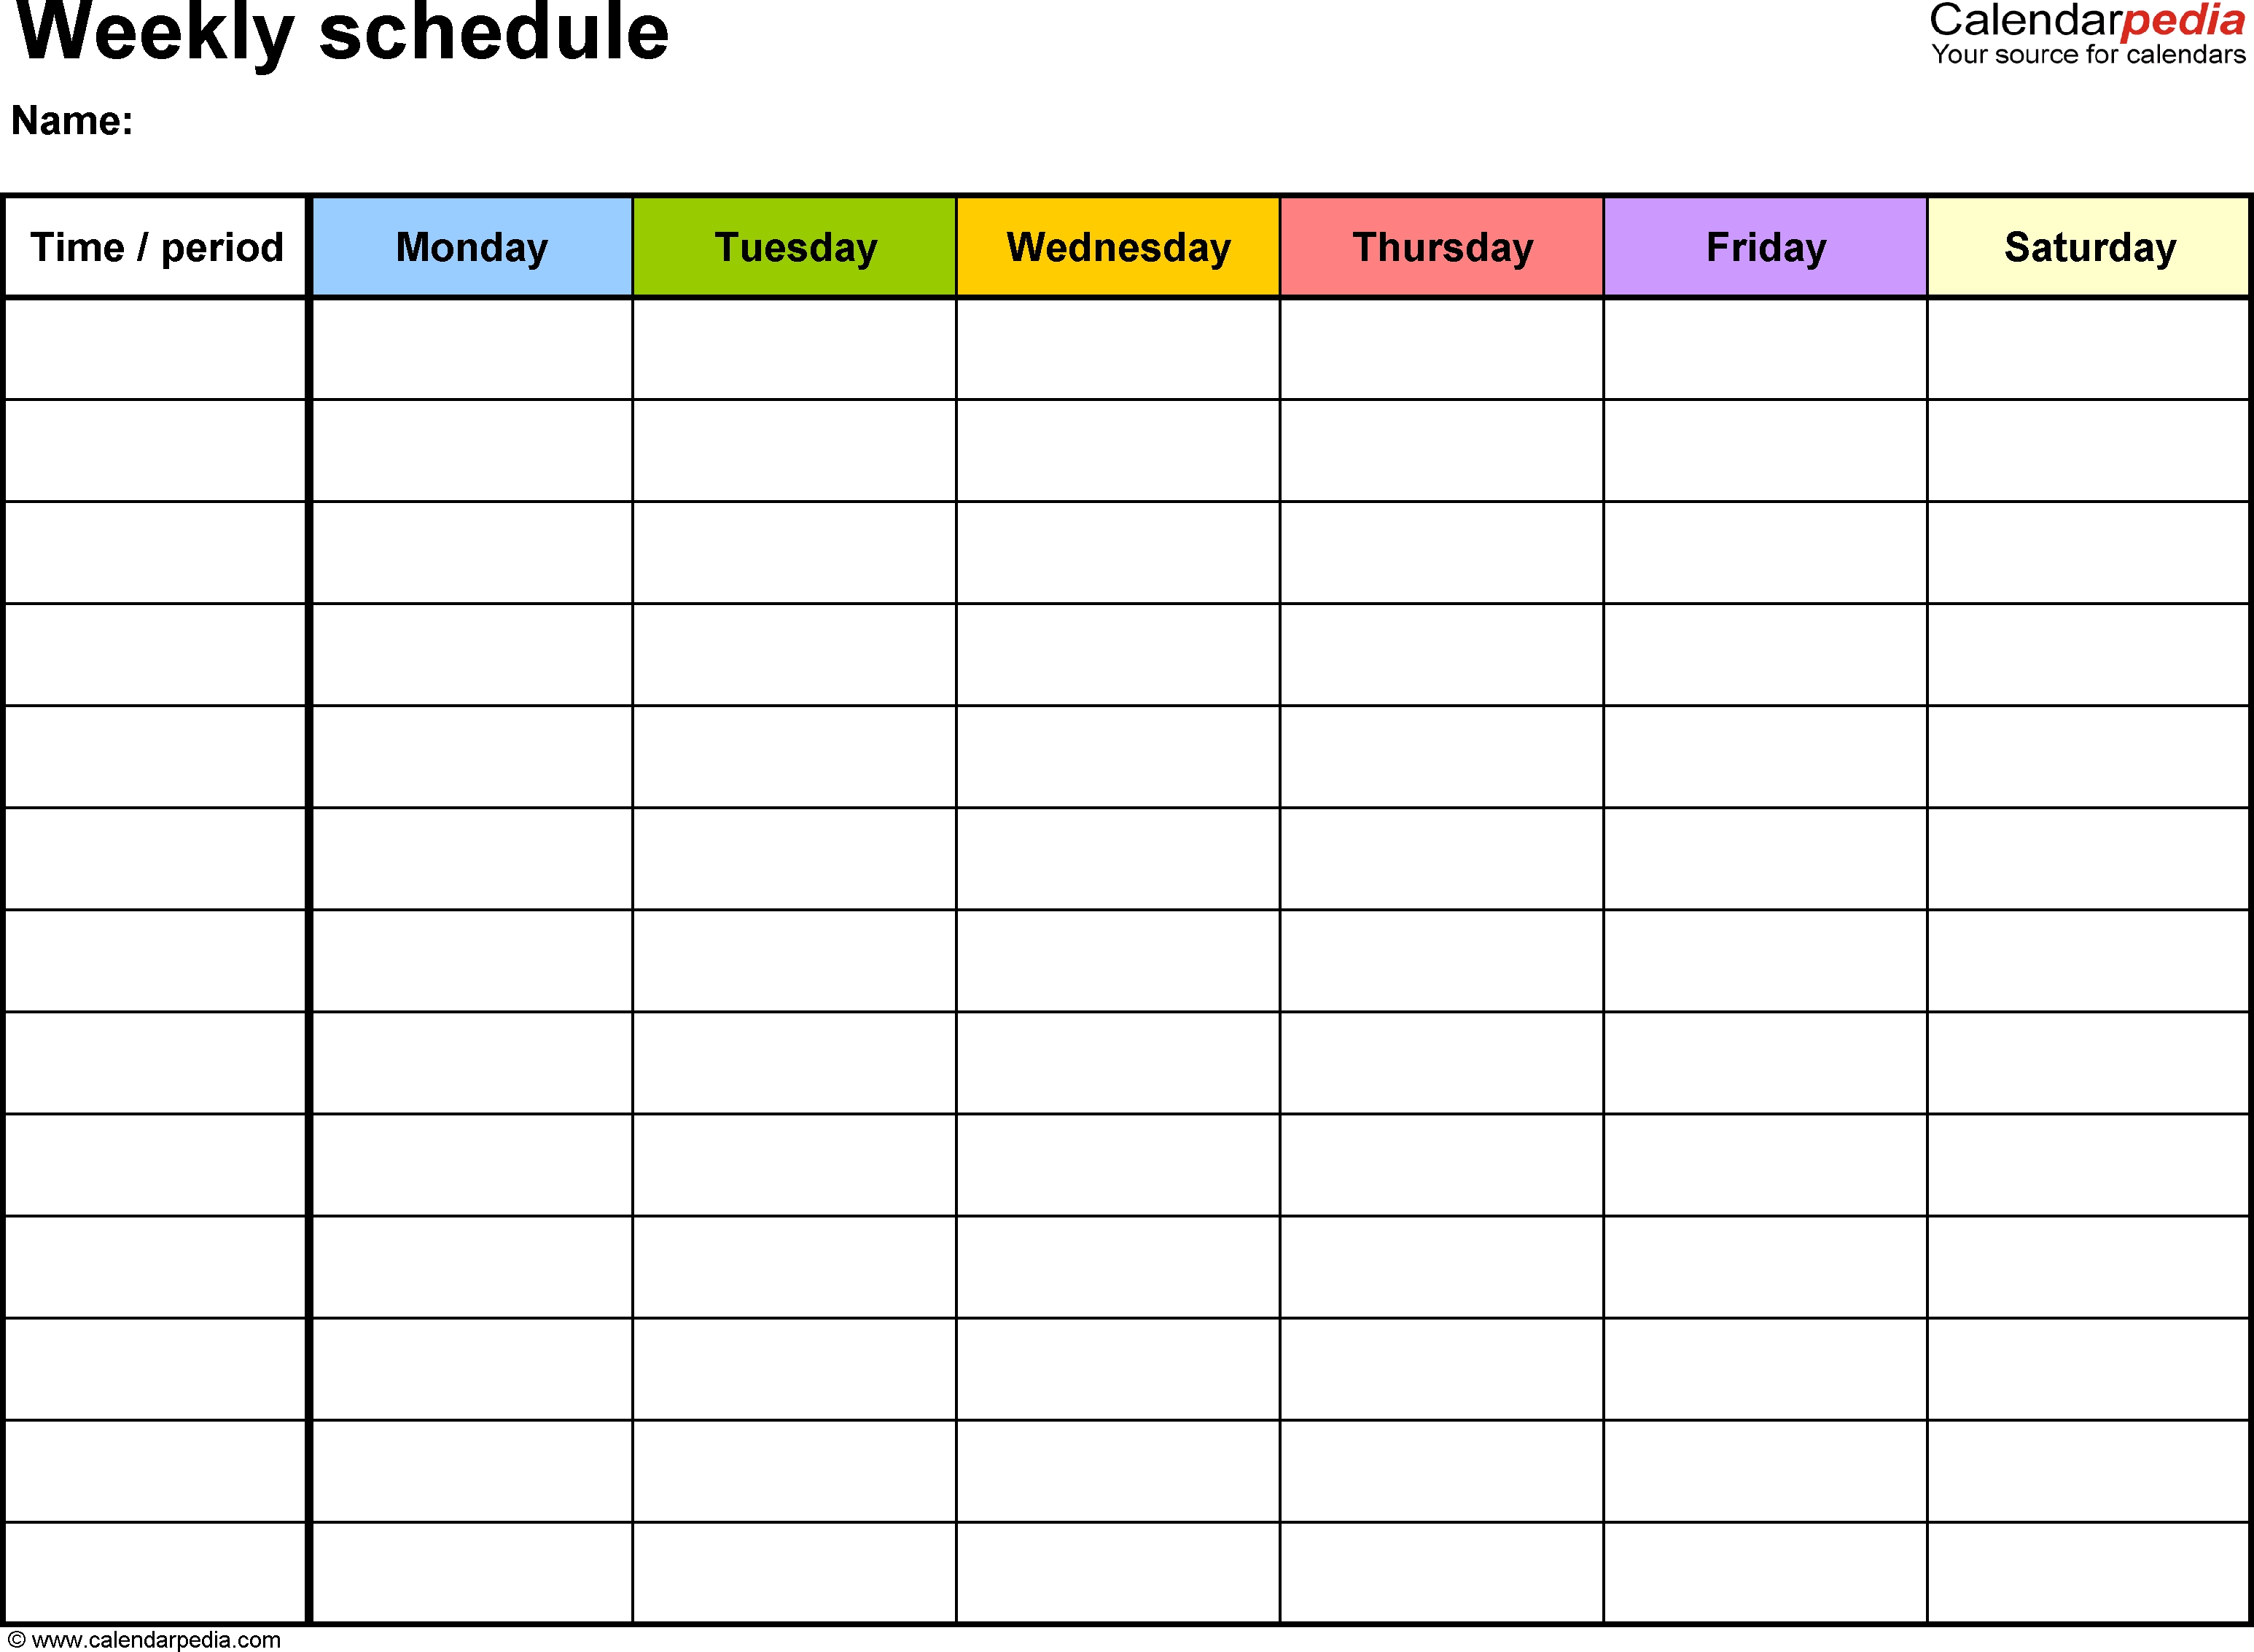 Free Weekly Schedule Templates For Word - 18 Templates  Blank Week Calender With Times